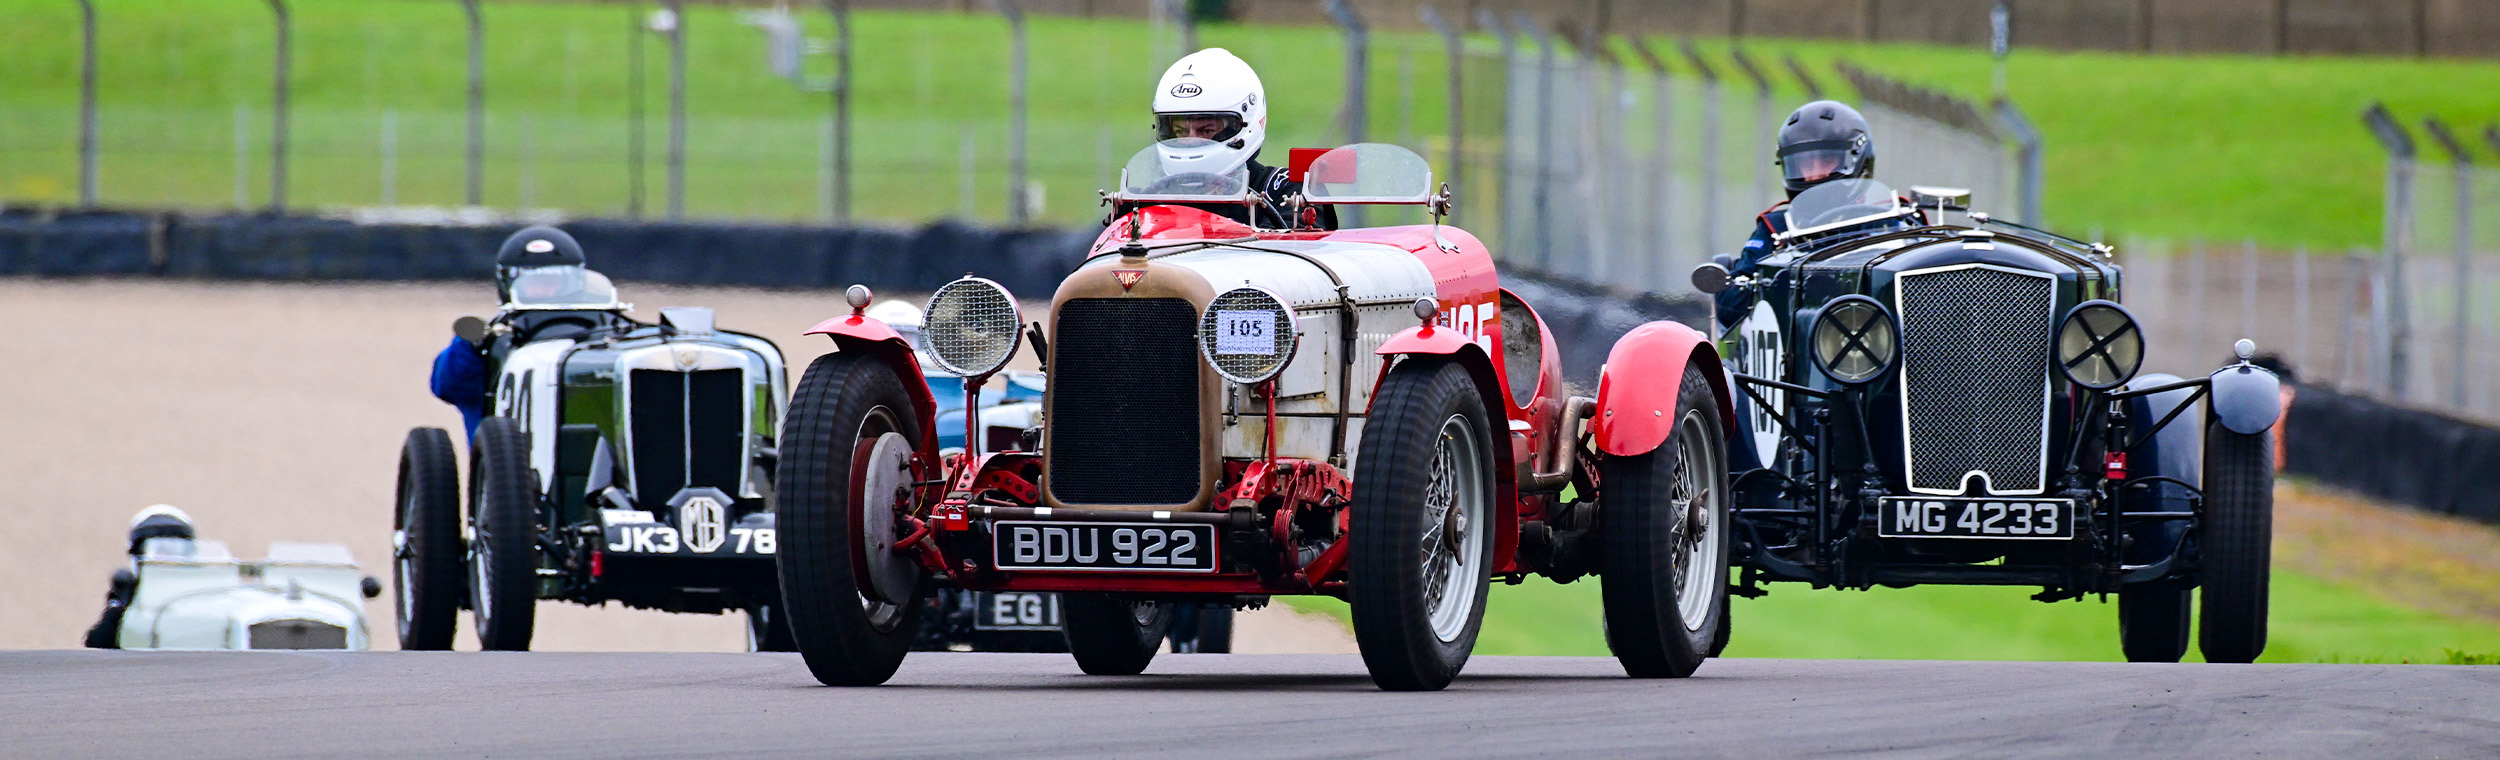 90 YEARS OF THE VSCC CELEBRATION